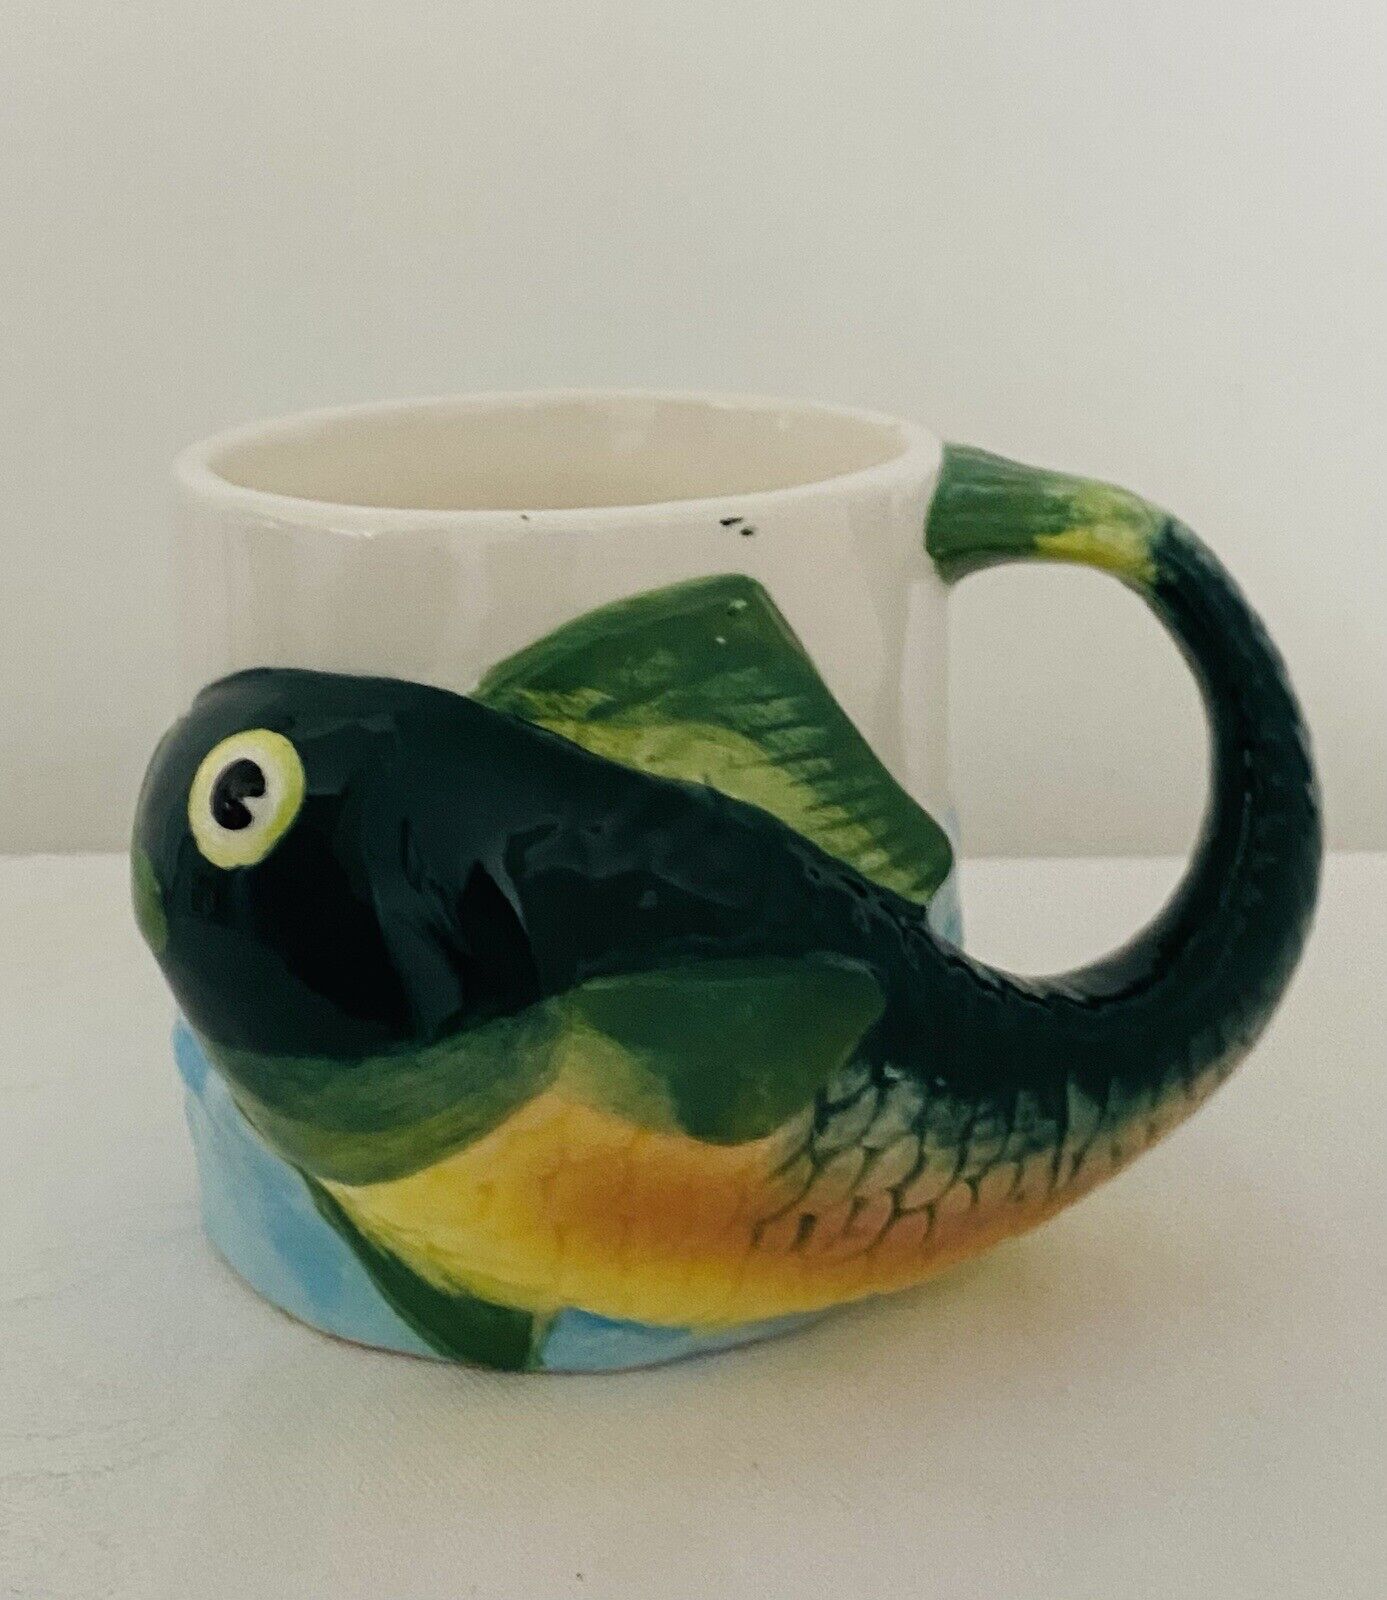 Vintage Russ Berrie 3D Ceramic Trout Fish Coffee Mug Colorful Unique for Display